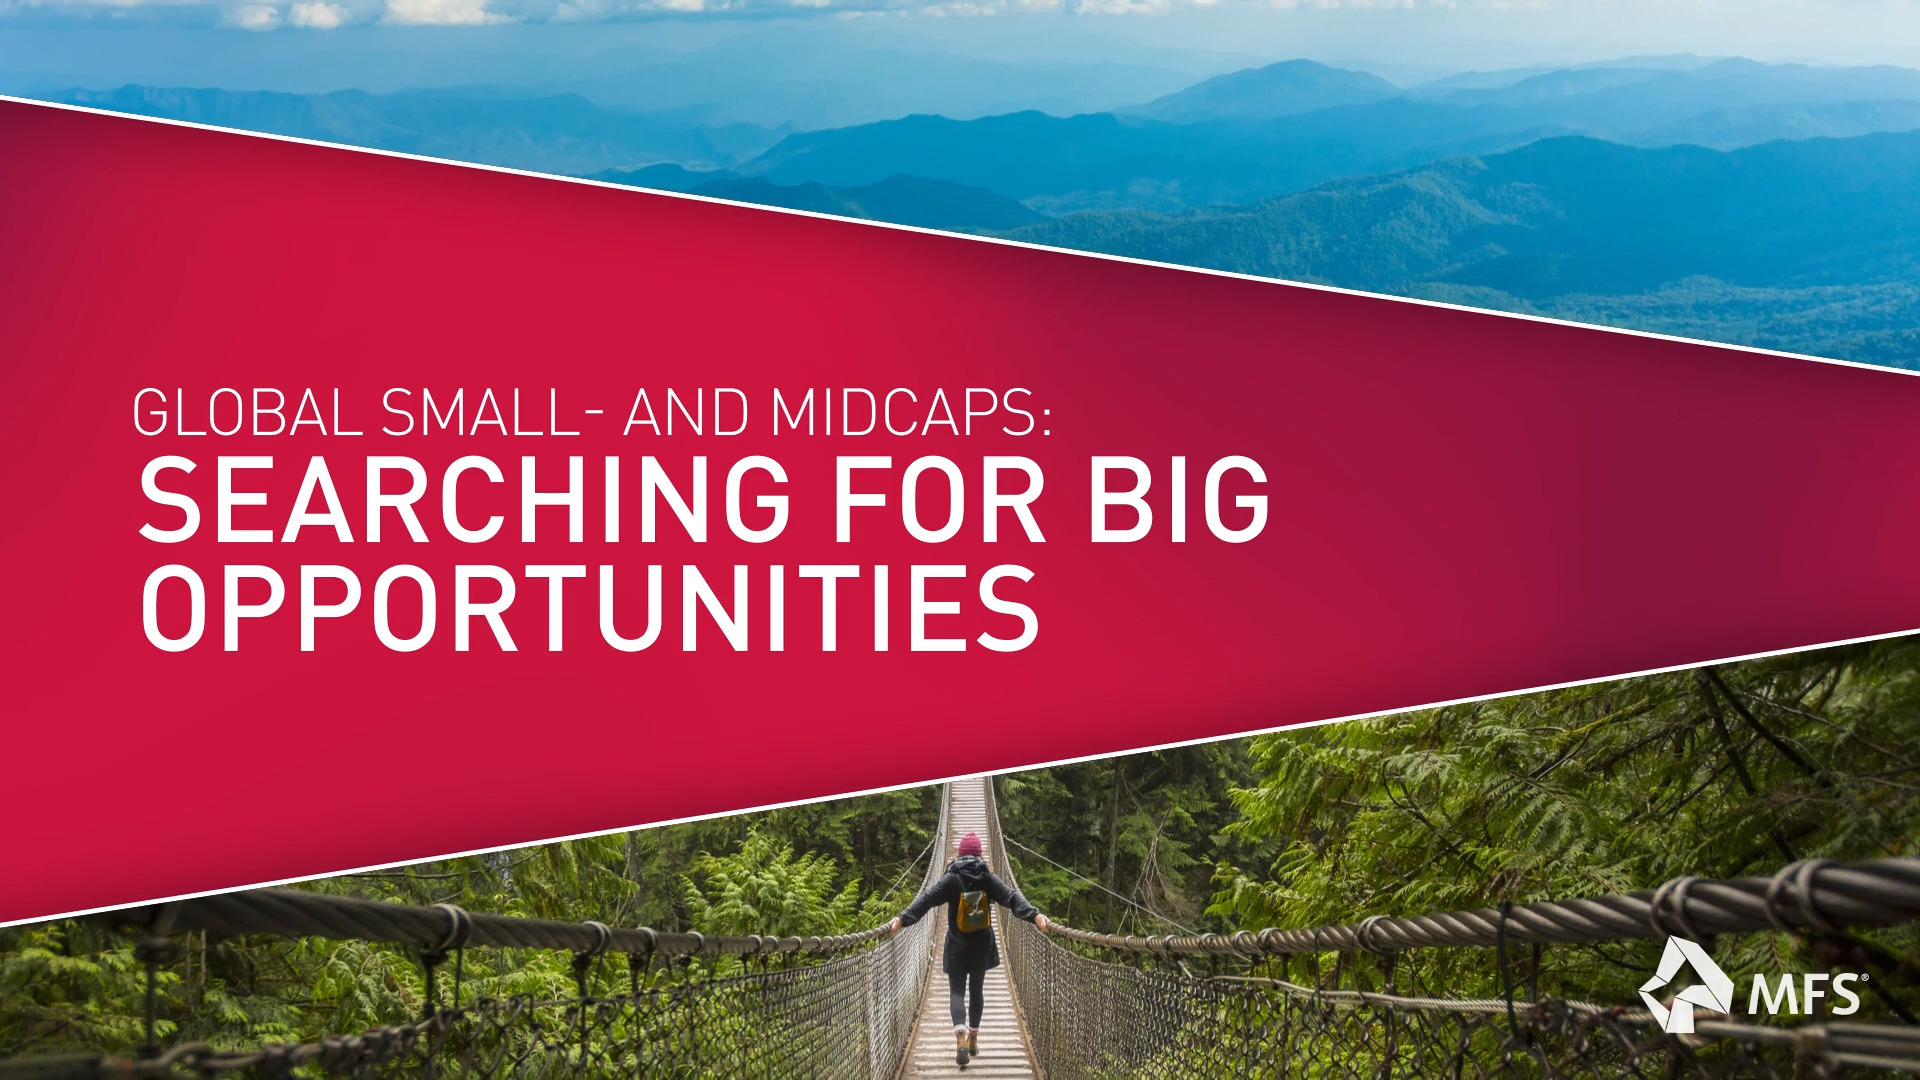 Global Small- and Midcaps: Searching For Big Opportunities